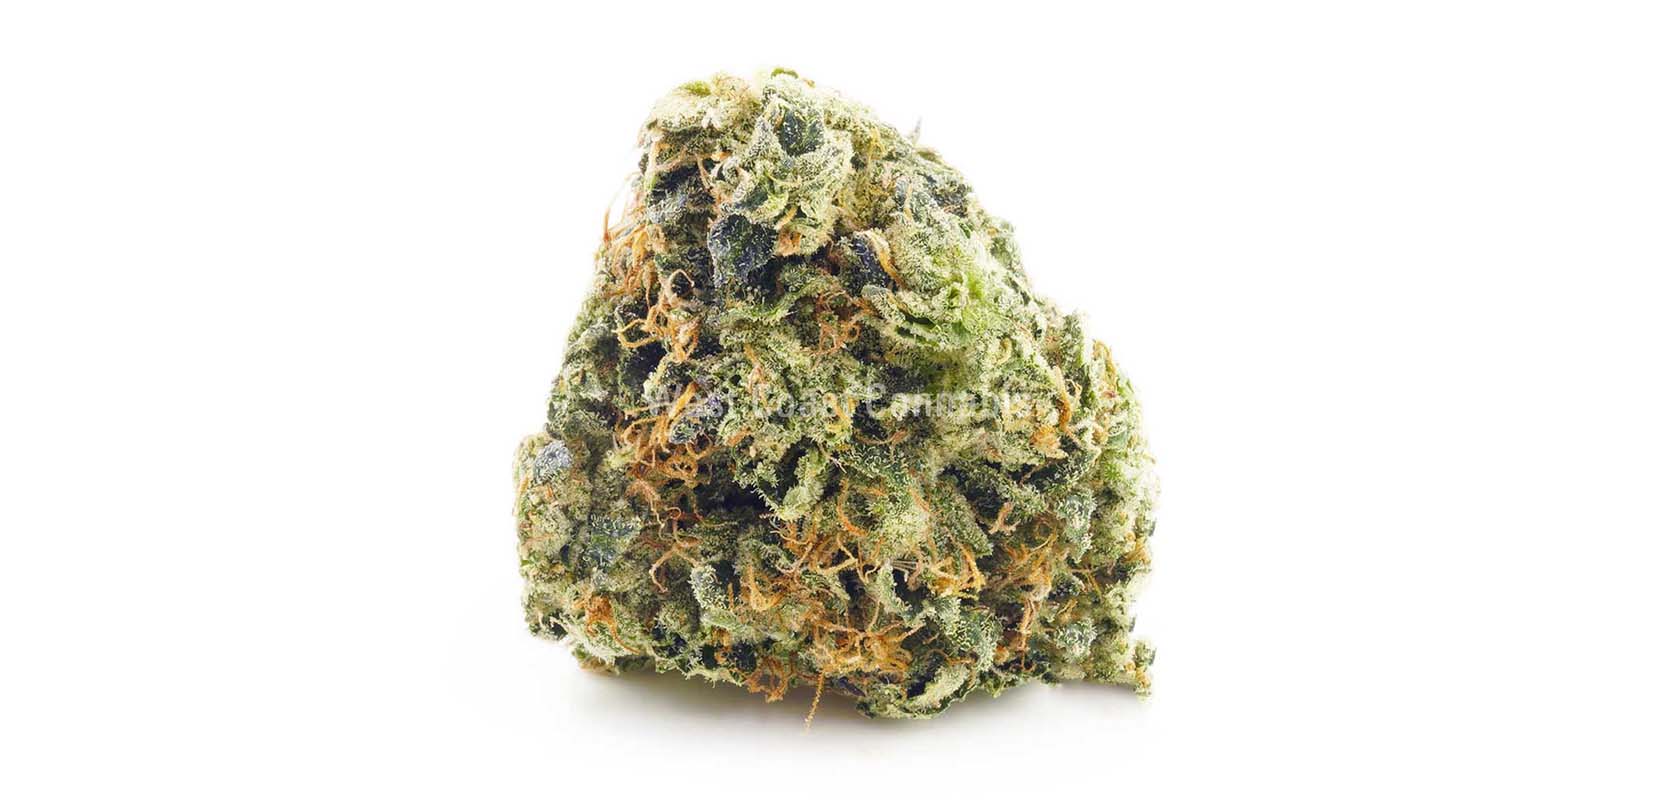 Cheap weed budget buds Master Jedi strain from dispensary for cheapweed and BC cannabis. marijuana dispensary. weed edibles. canada weed. Dispencary.